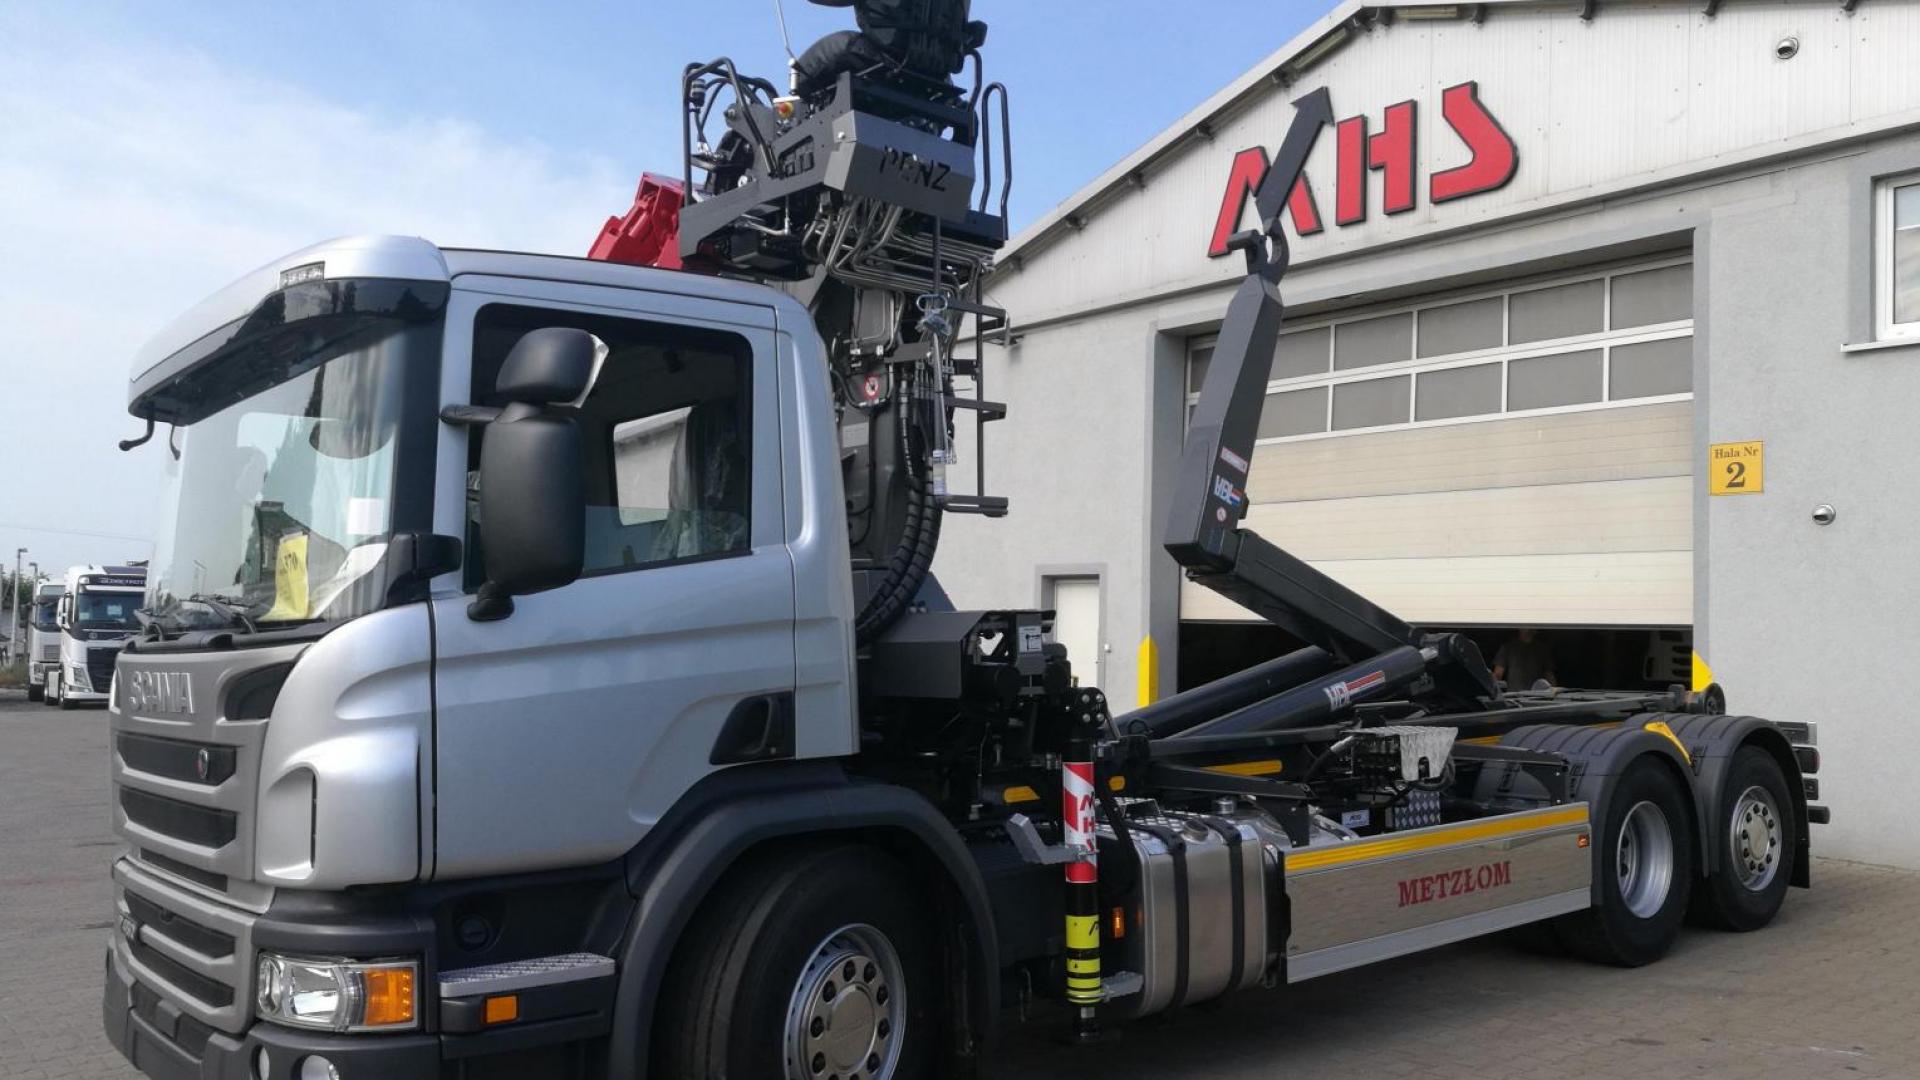 Crane hook combi built by MHS from Poland 